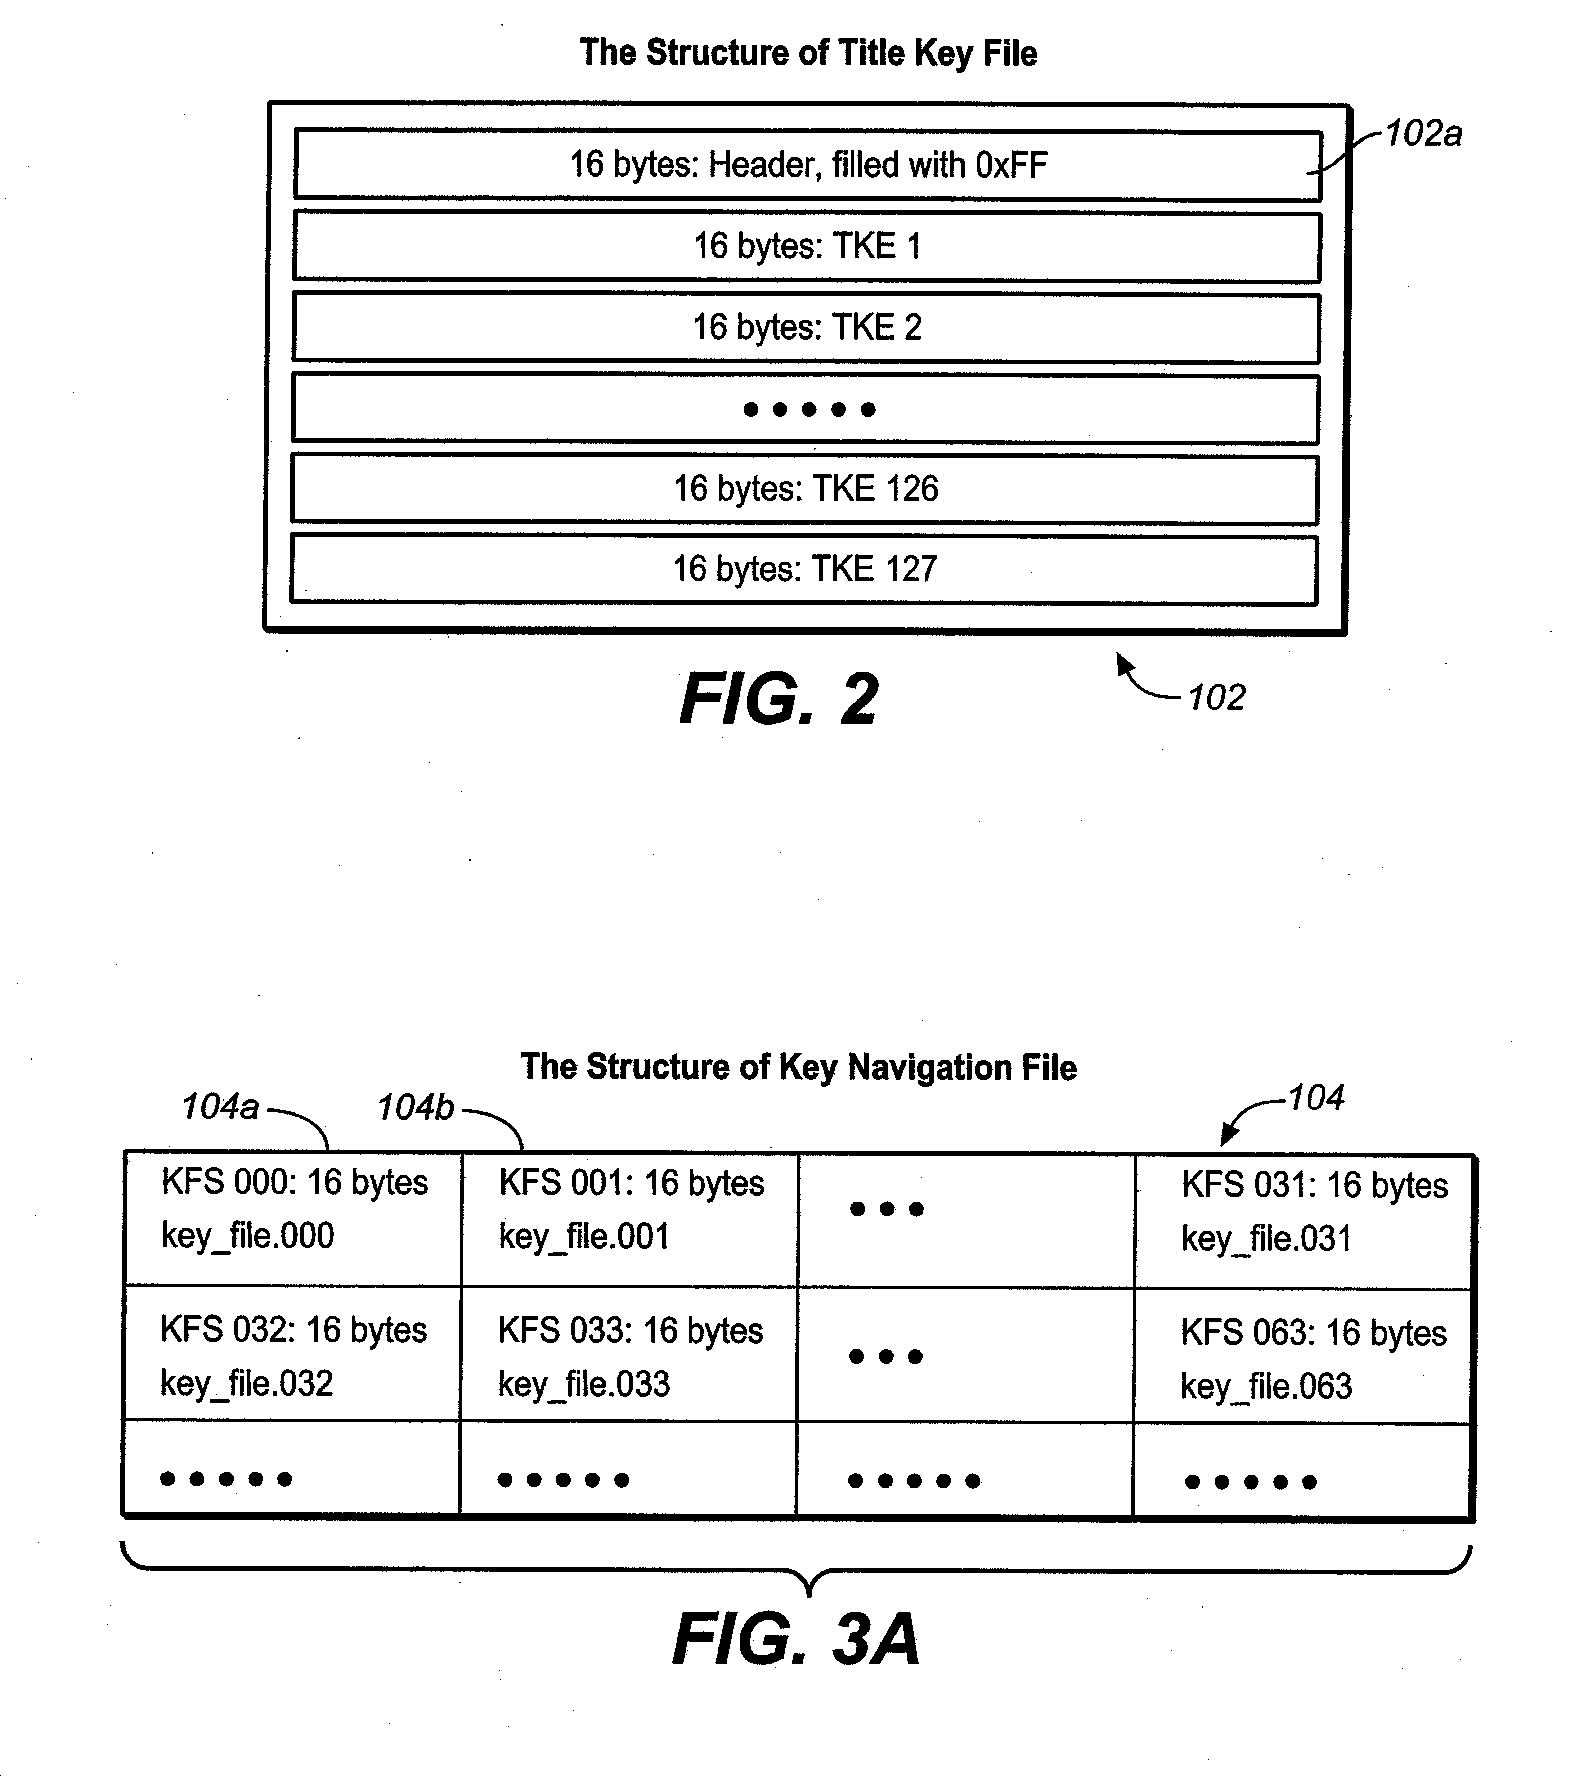 Method for managing keys and/or rights objects